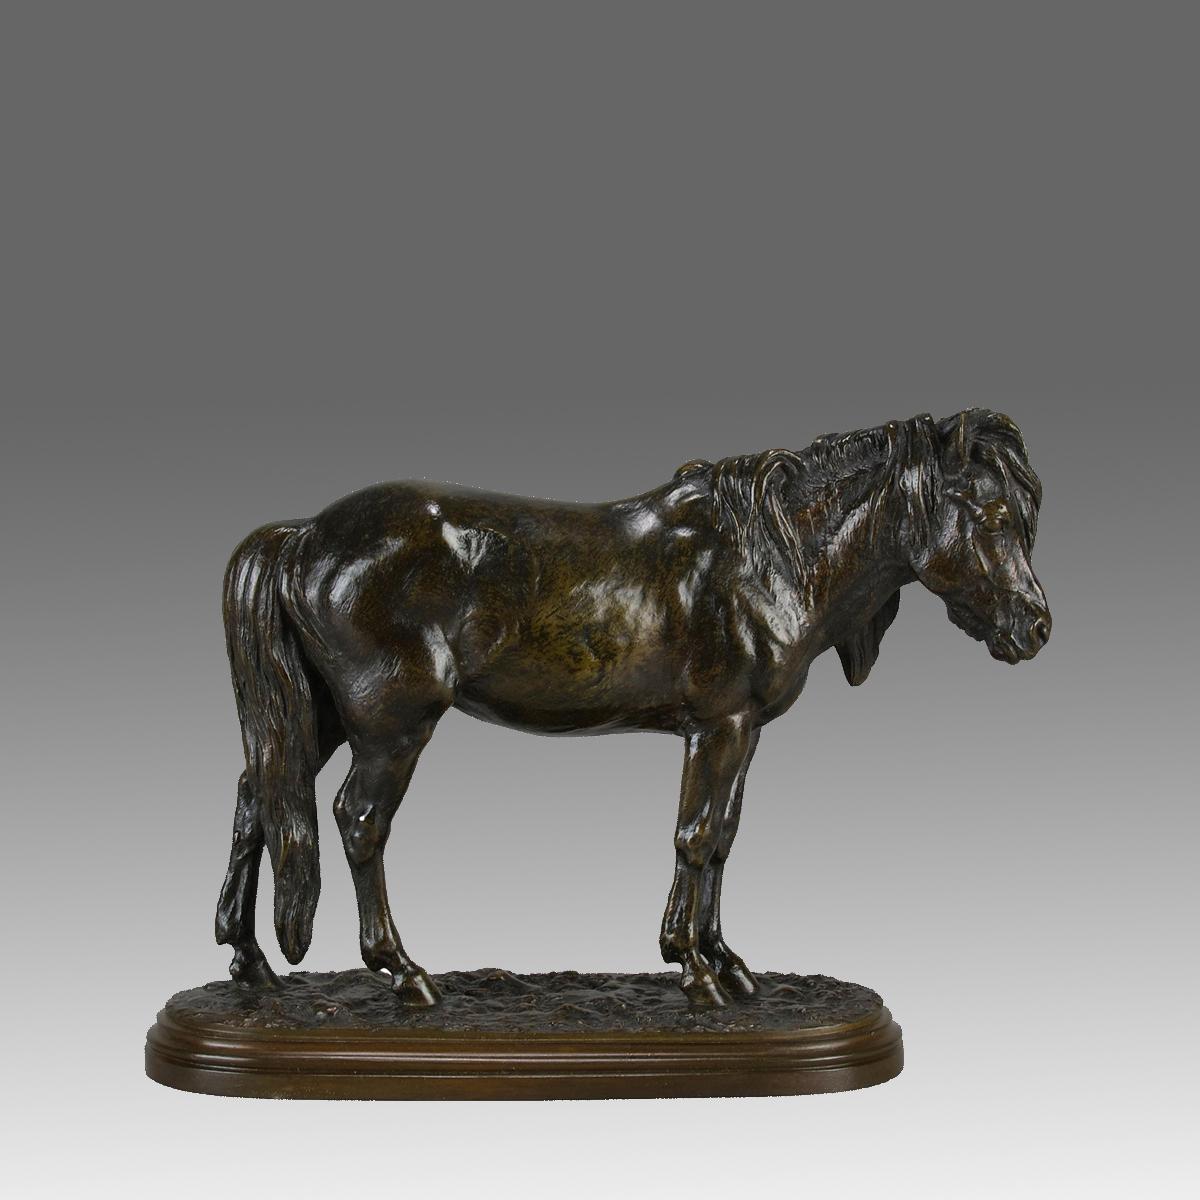 A charming late 19th Century French Animalier bronze study of a standing pony with rich brown patina and excellent crisp surface detail, raised on a stepped integral base, signed I Bonheur and stamped with Peyrol Foundry mark

ADDITIONAL